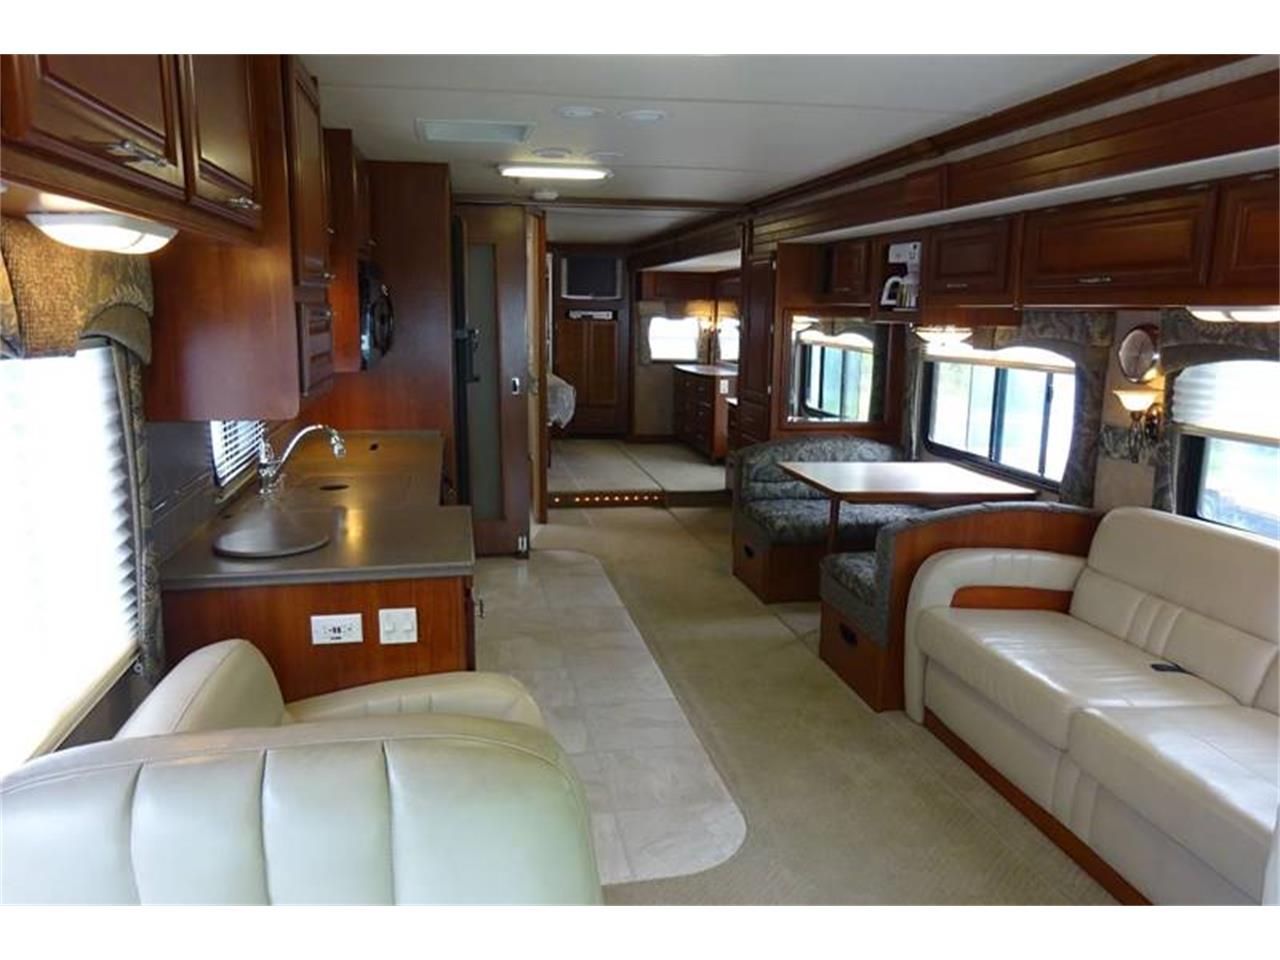 2007 Fleetwood Discovery for sale in Hilton, NY – photo 100